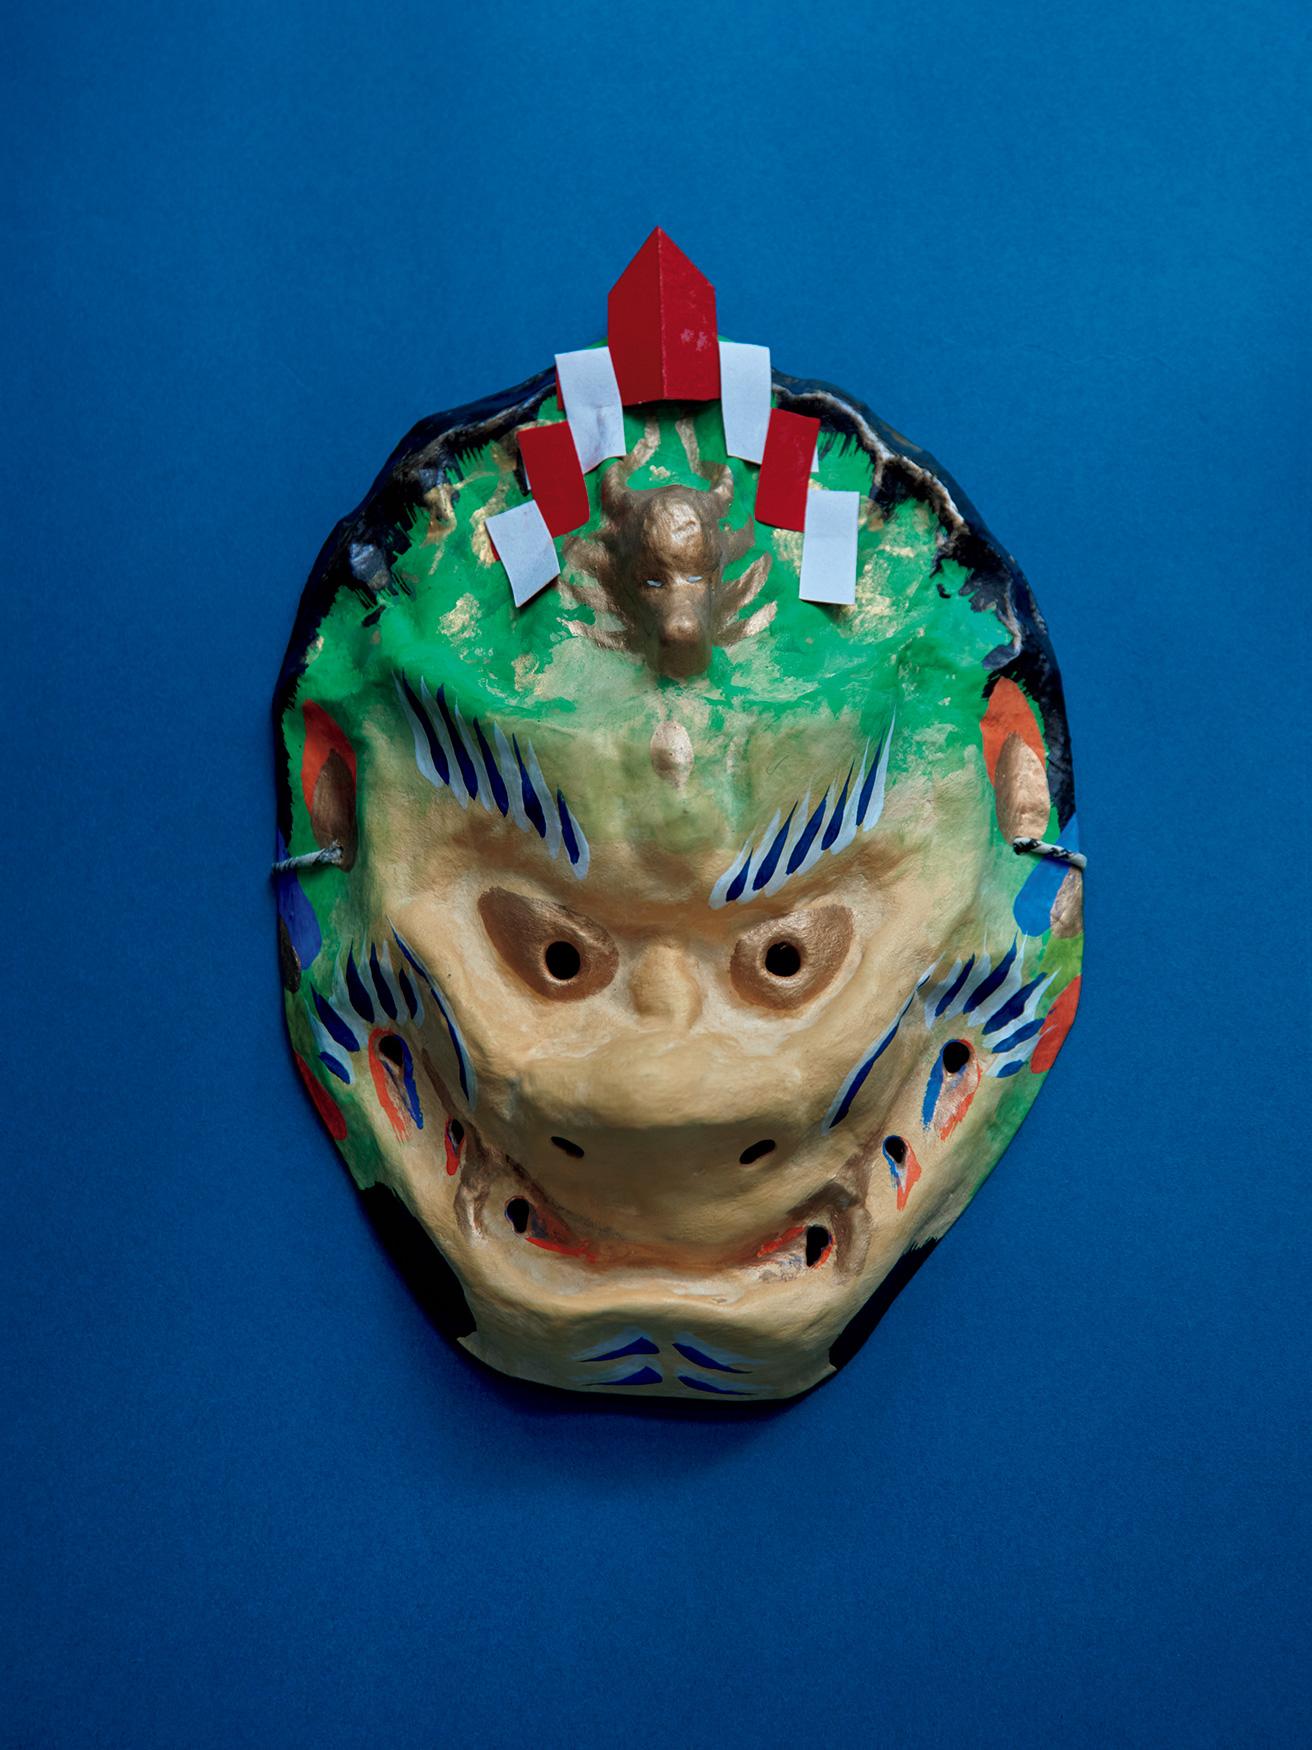 Purchase No. 67【Saga Mask for the Year of the Dragon】Masks representing figures of the traditional Chinese zodiac that invite good fortune, constructed of antique, handmade washi paper.